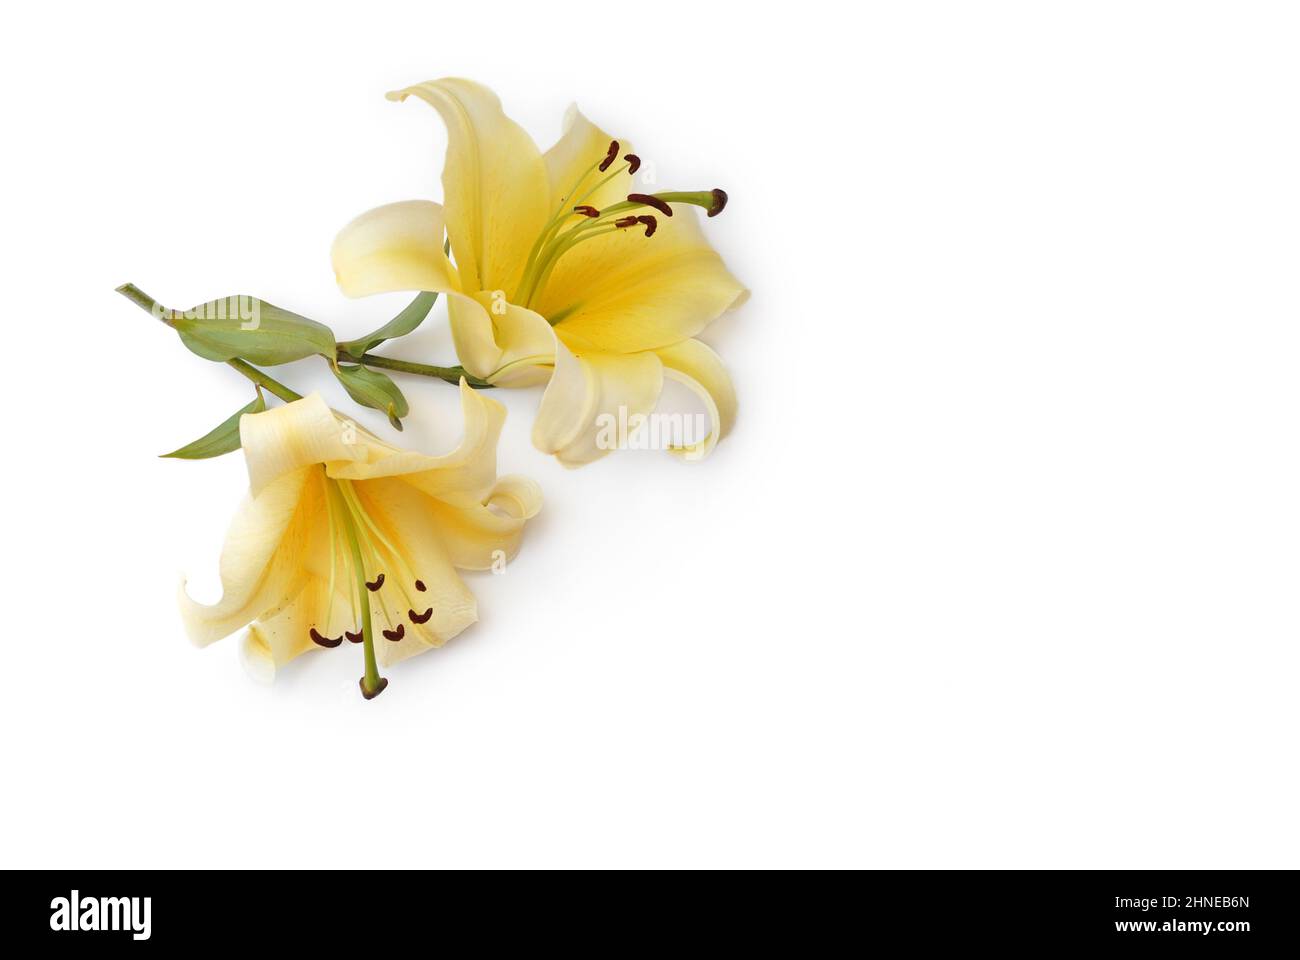 Lily flower lies on white background, 3d view Stock Photo